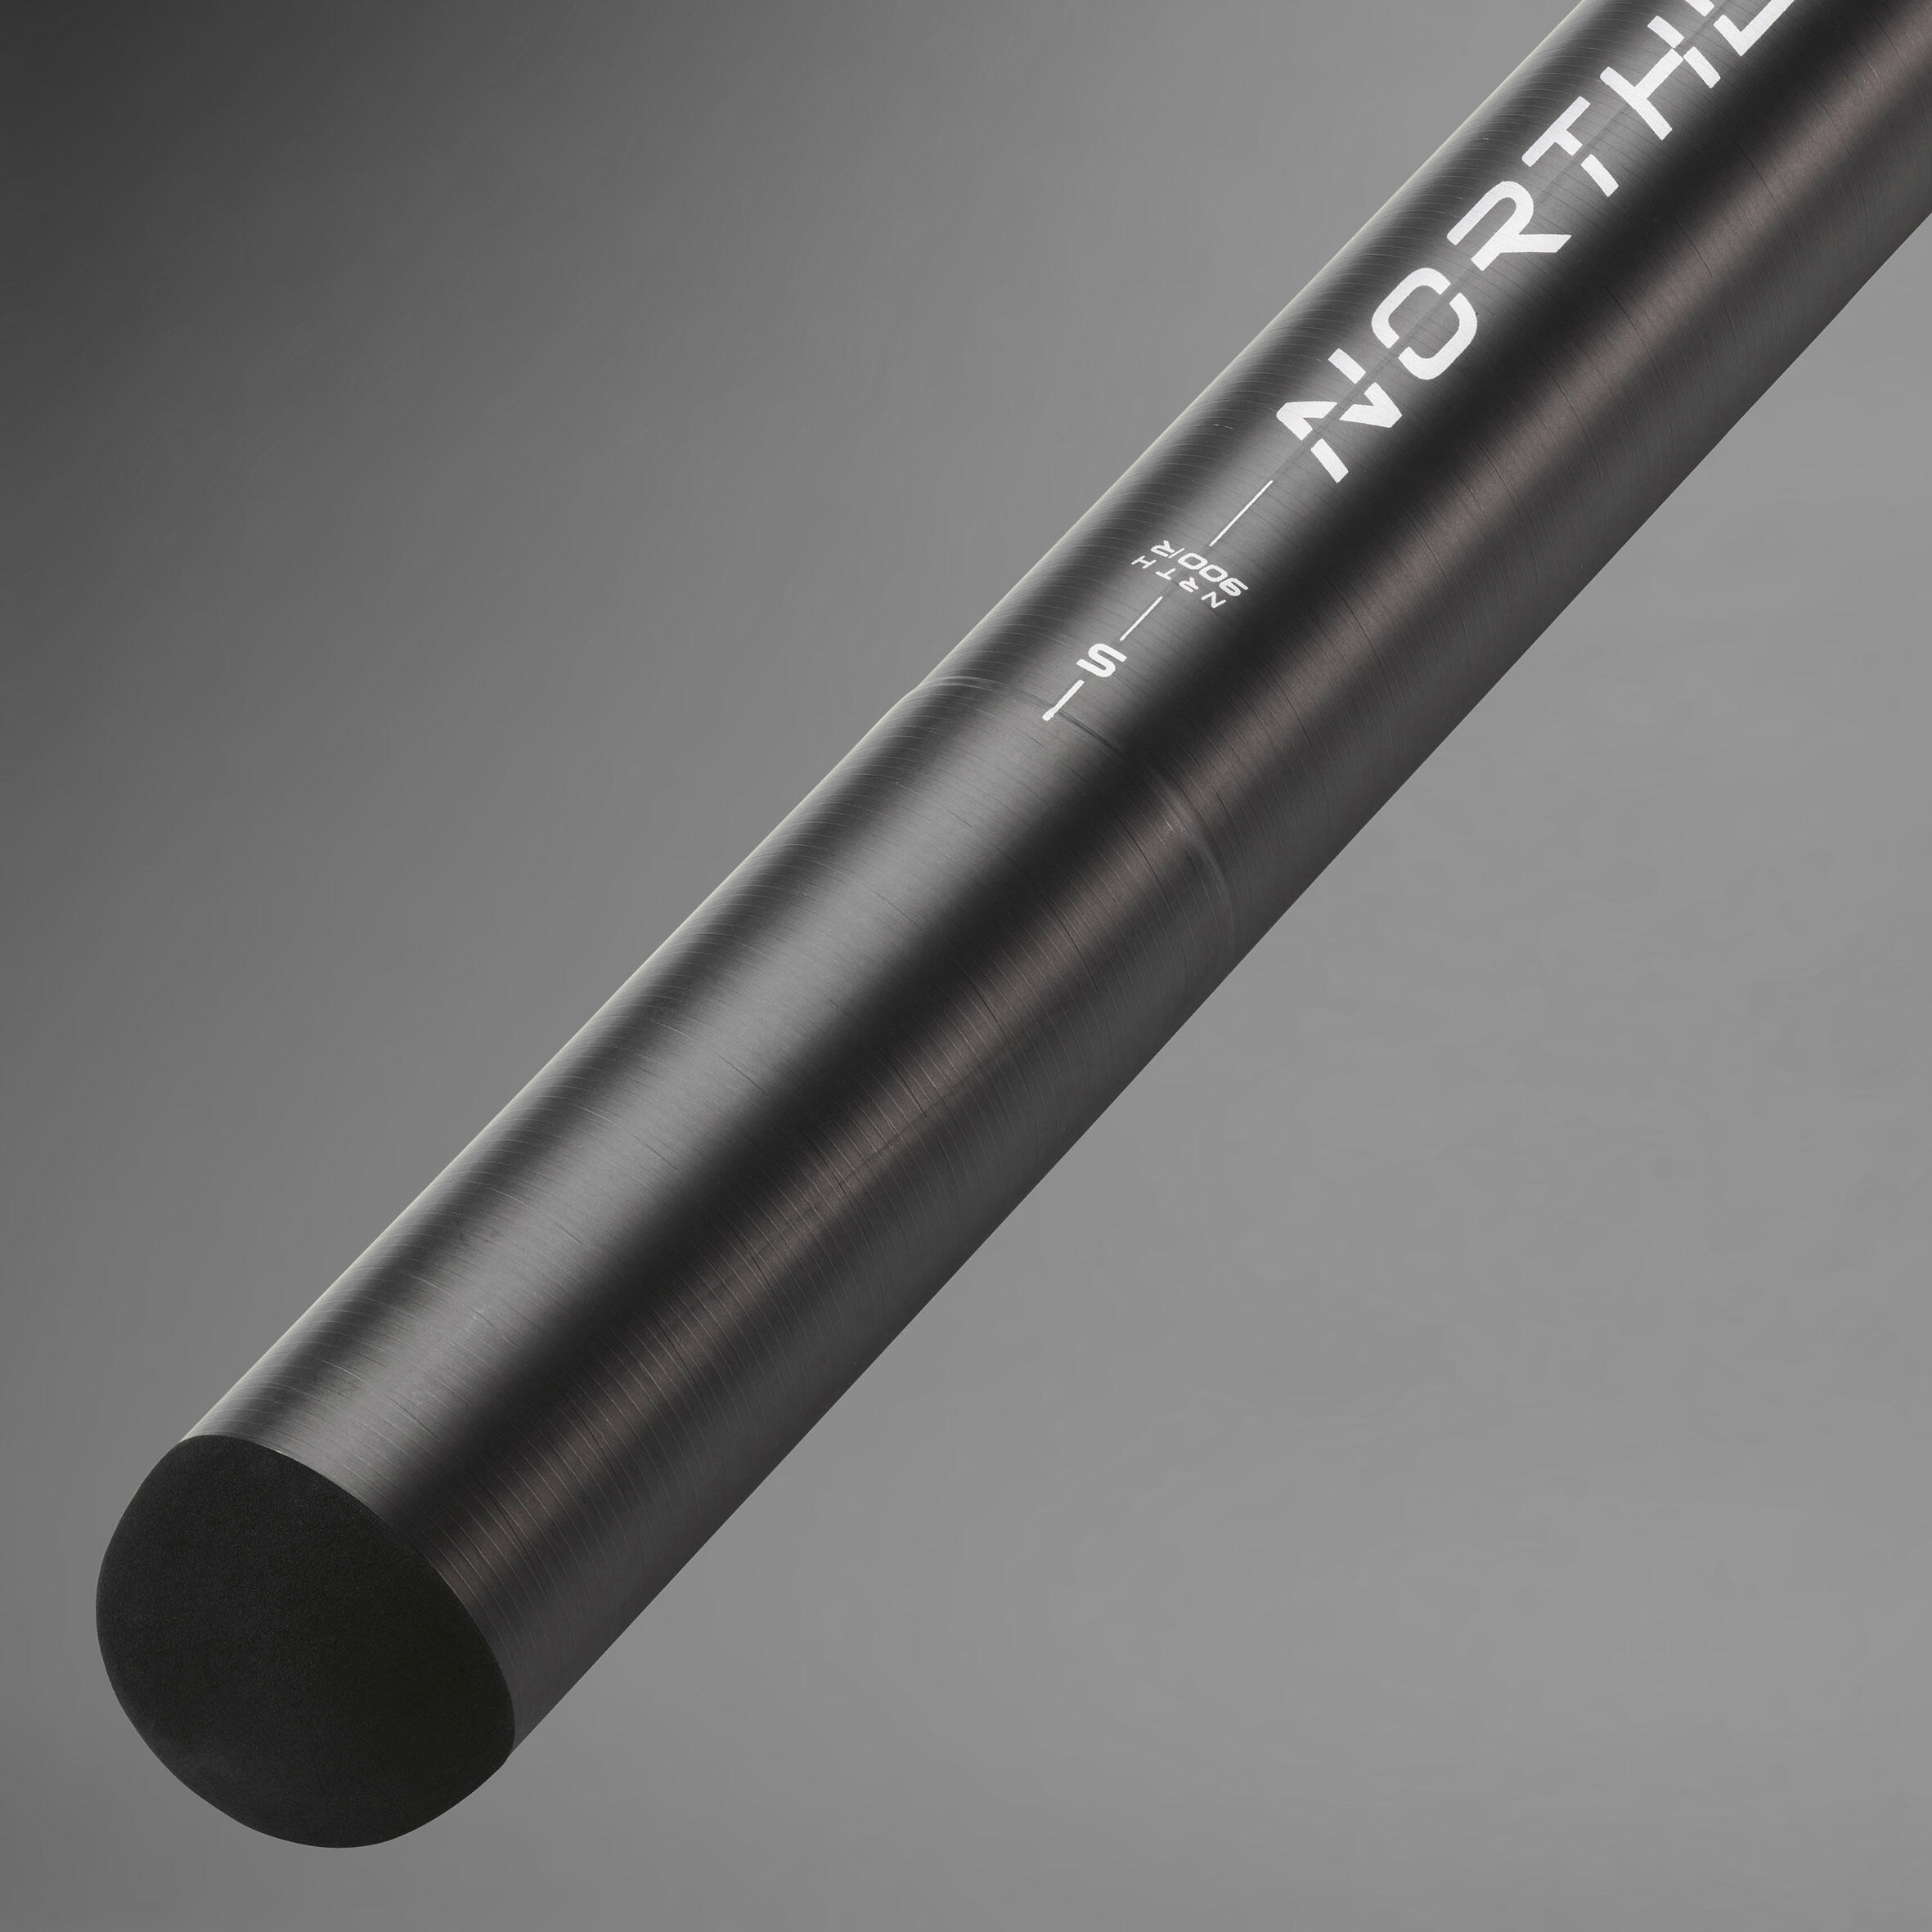 50cl EXTENSION FOR THE 7 m & 8.8 m COMPONENTS FOR THE NORTHLAKE 900R ROD 2/4